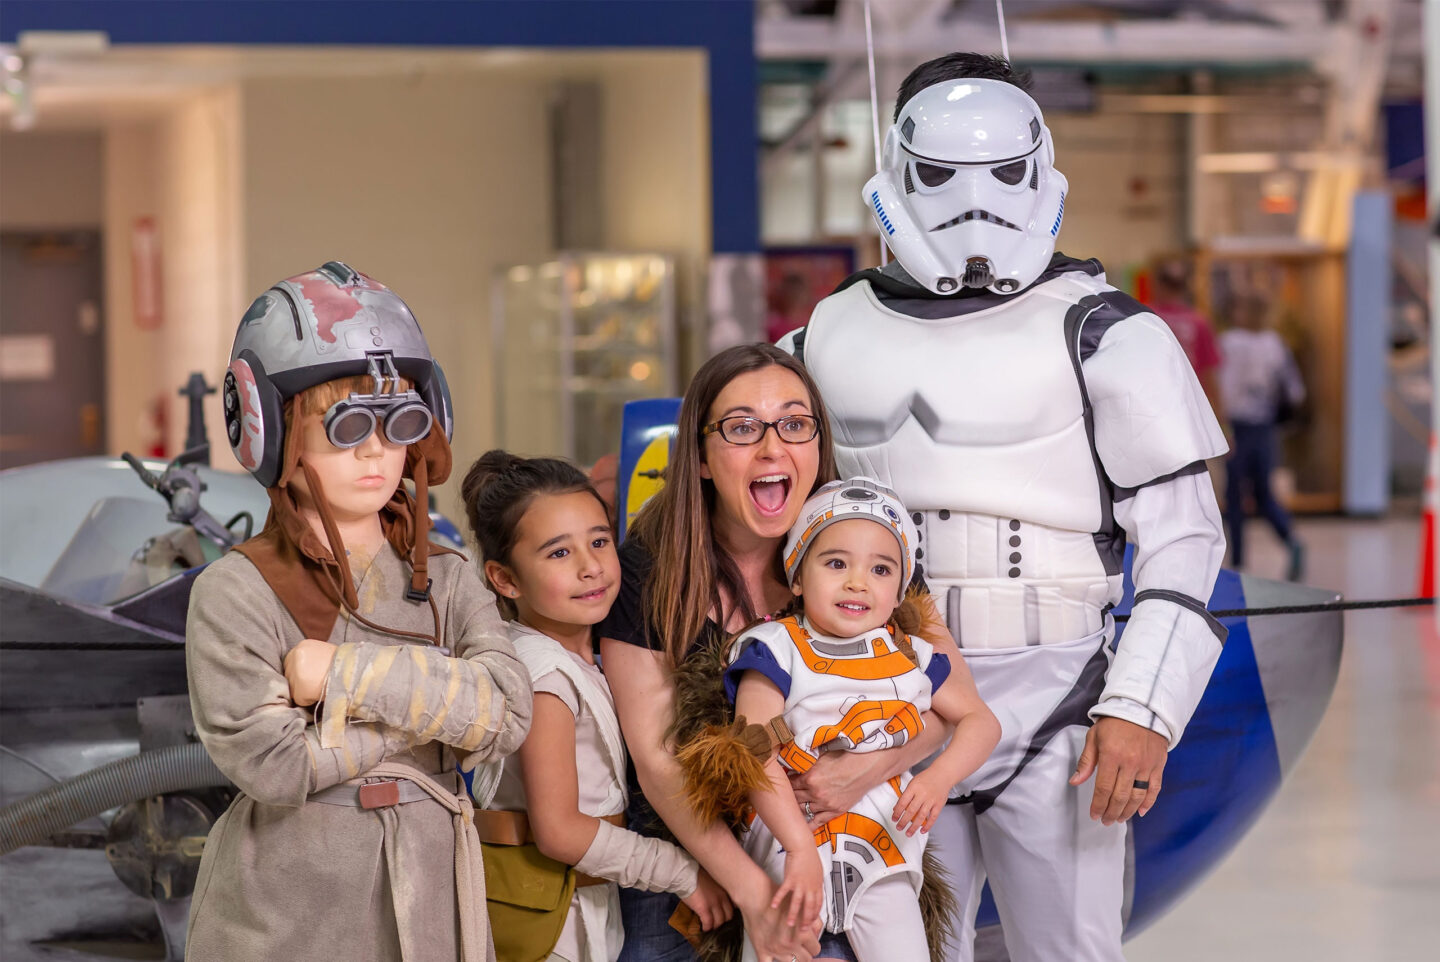 Family smiling next to Star Wars characters